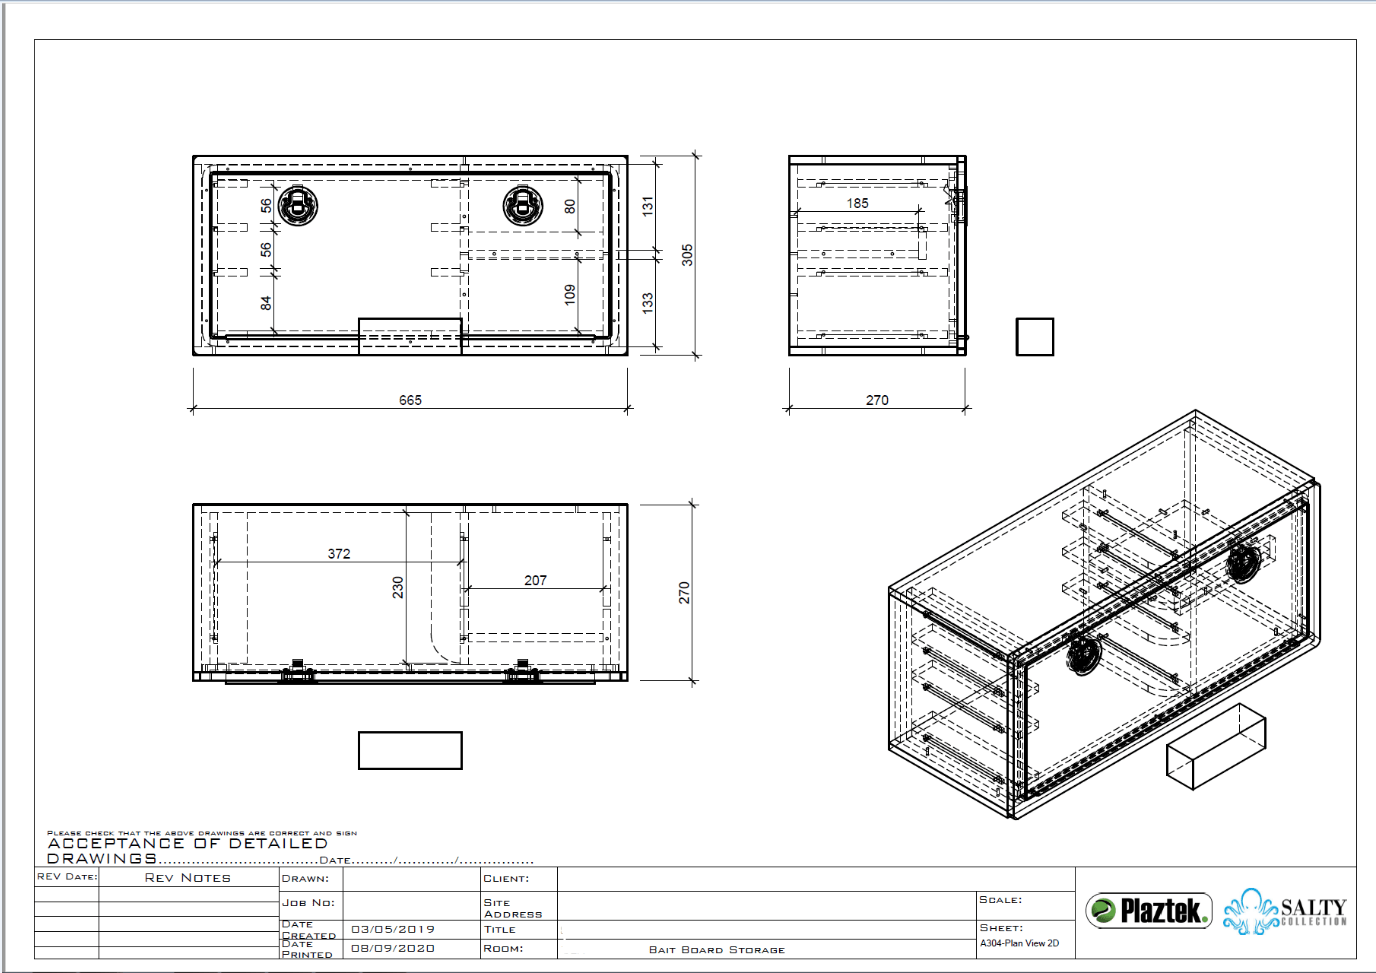 CAD drawing of the unit with the measurements on it. Made in Australia.